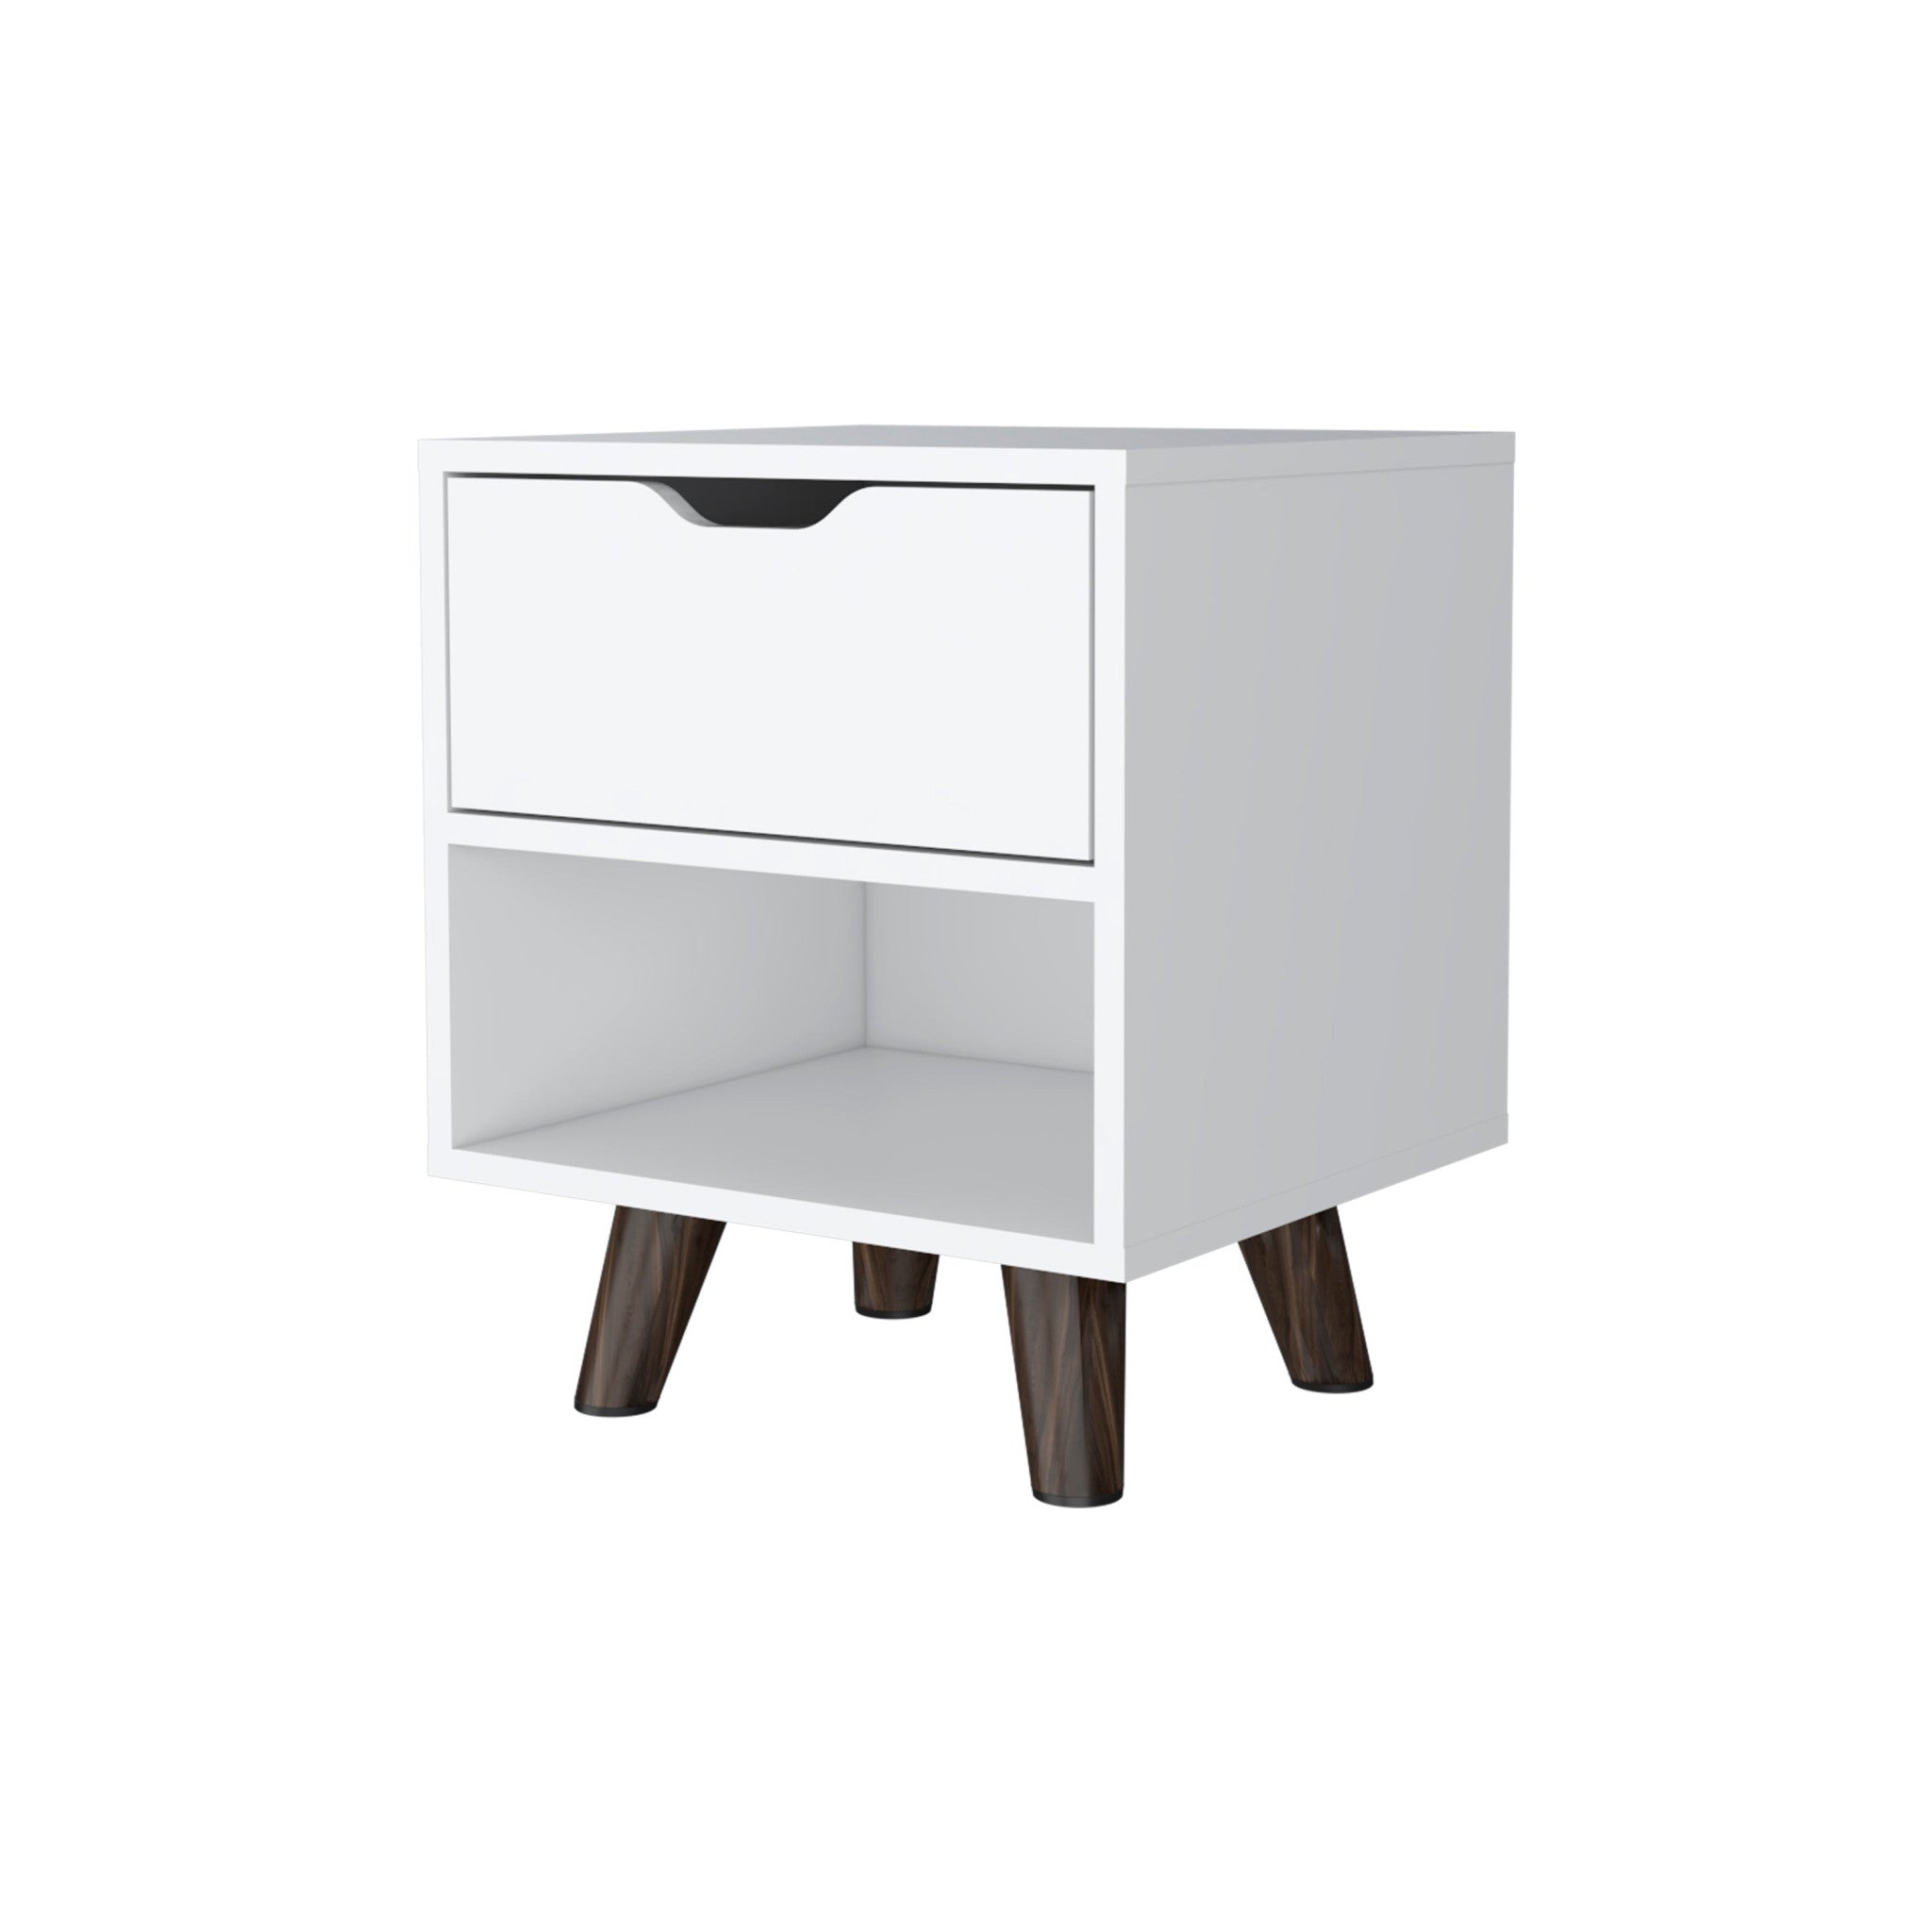 19" White One Drawer Faux Wood Nightstand